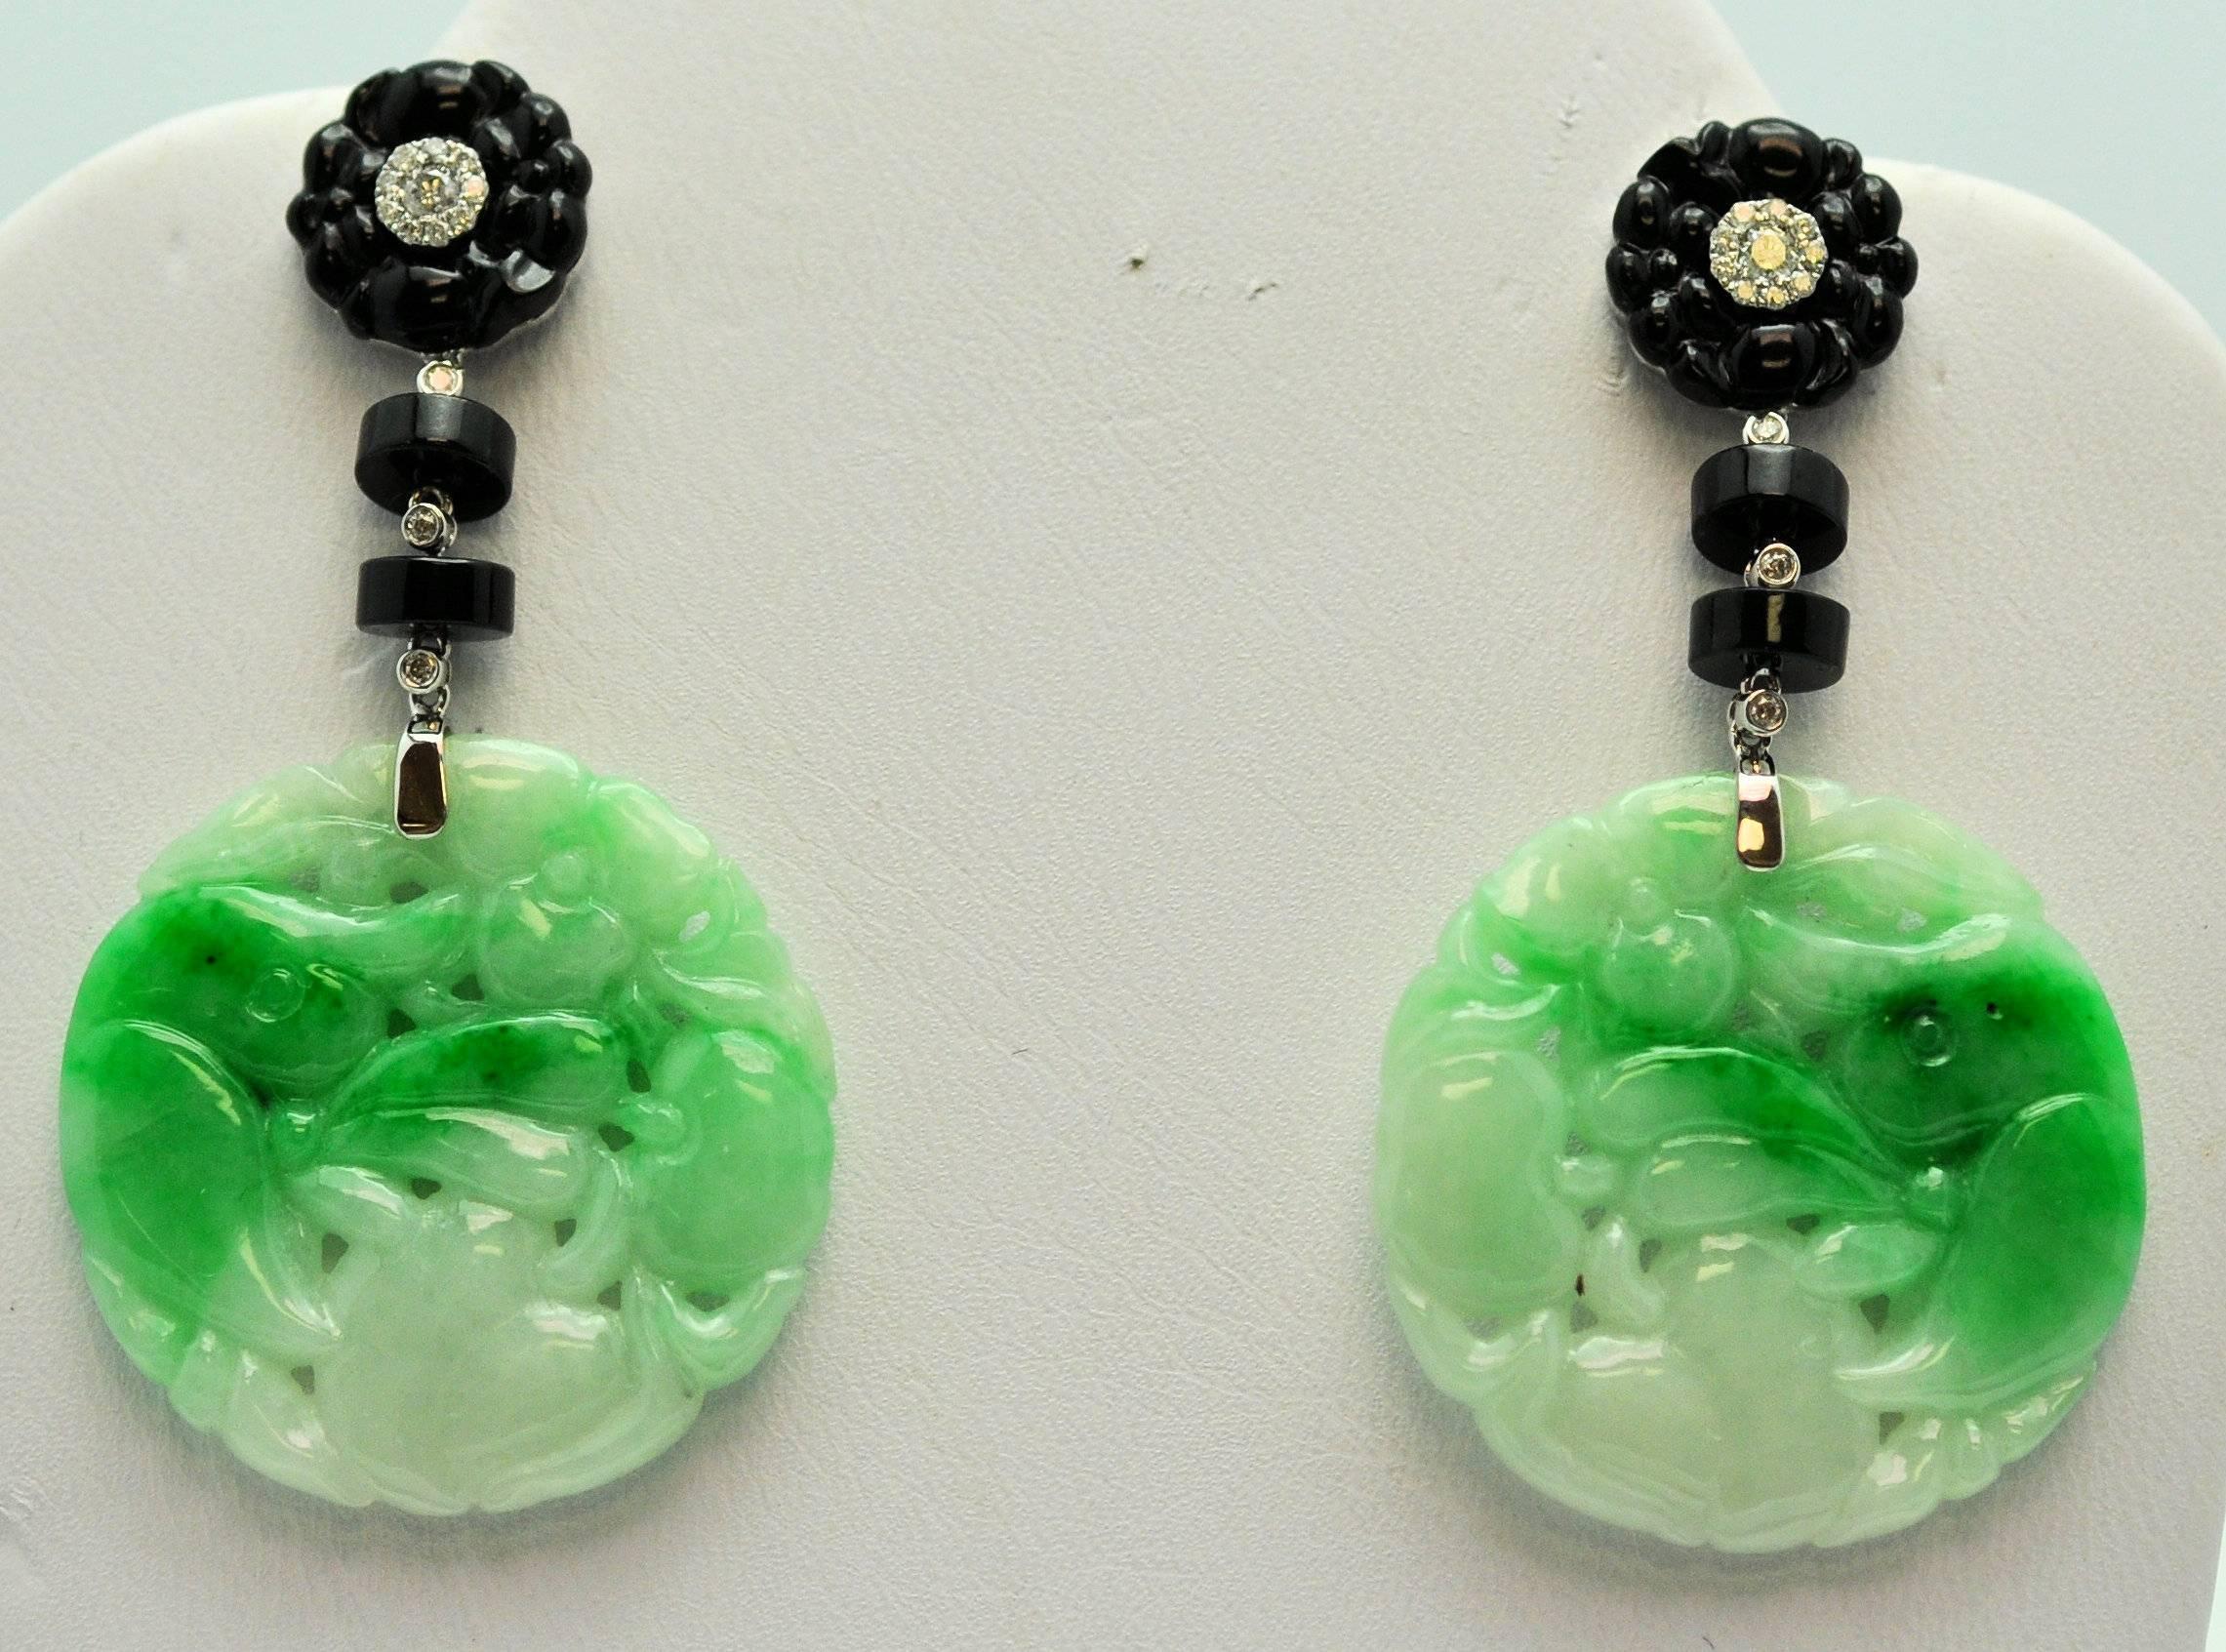 Dramatic, Statement Pendant earrings of finely carved jadeite jade in mottled green to white.  18K white gold with floral carved top set with diamonds and drop in black onyx and diamond.  
Jade weighs 12.22 grams
Diamonds .22 ct. 
Gold 1.7 grams.